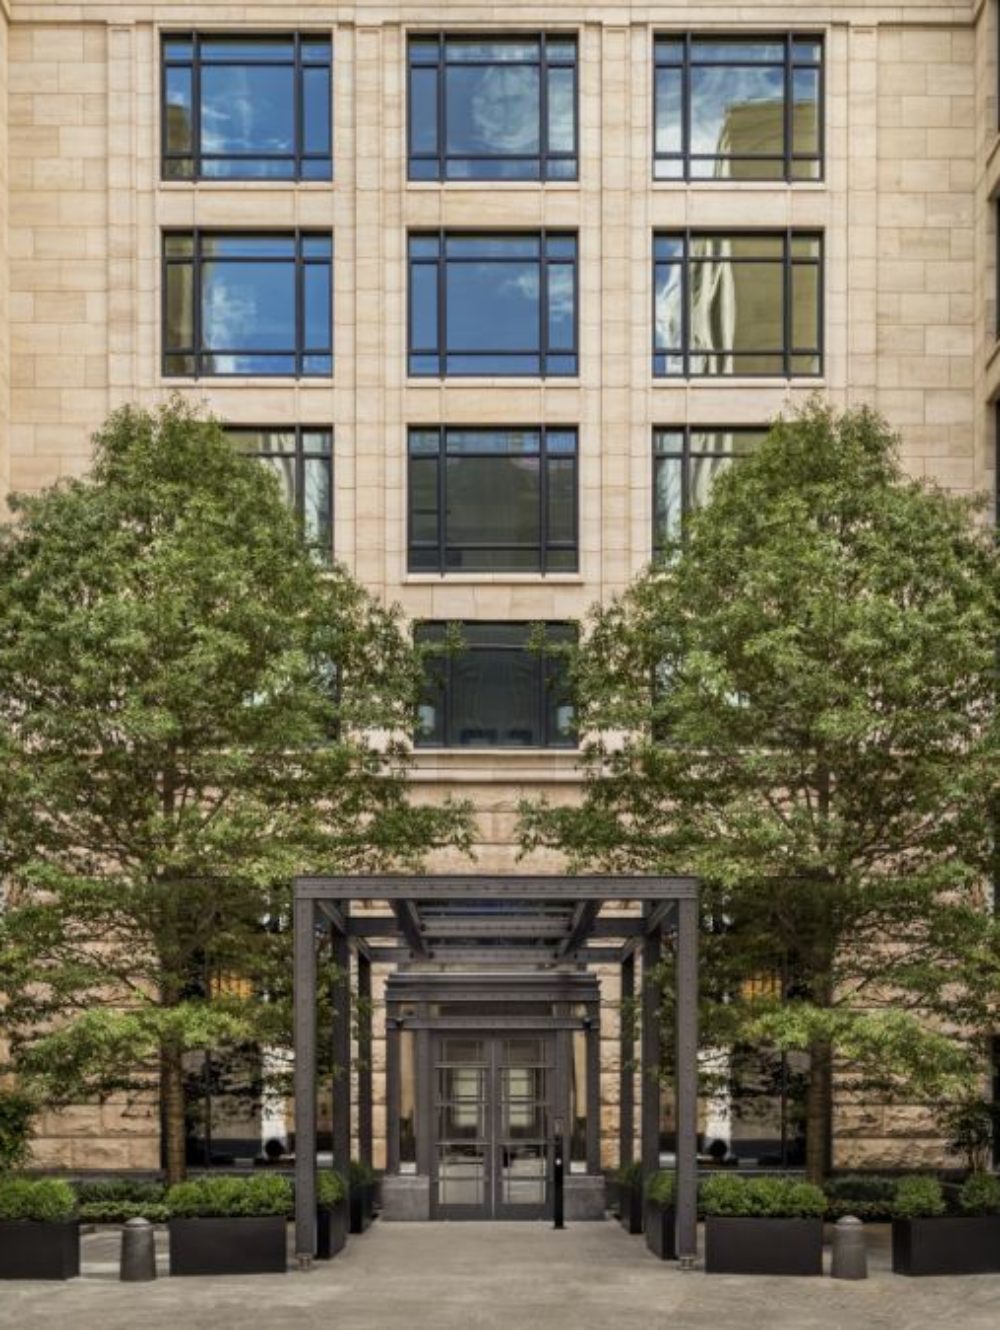 Exterior view of 70 Vestry condominiums entrance in New York City. Has symmetrical tree formation of both side of entrance.